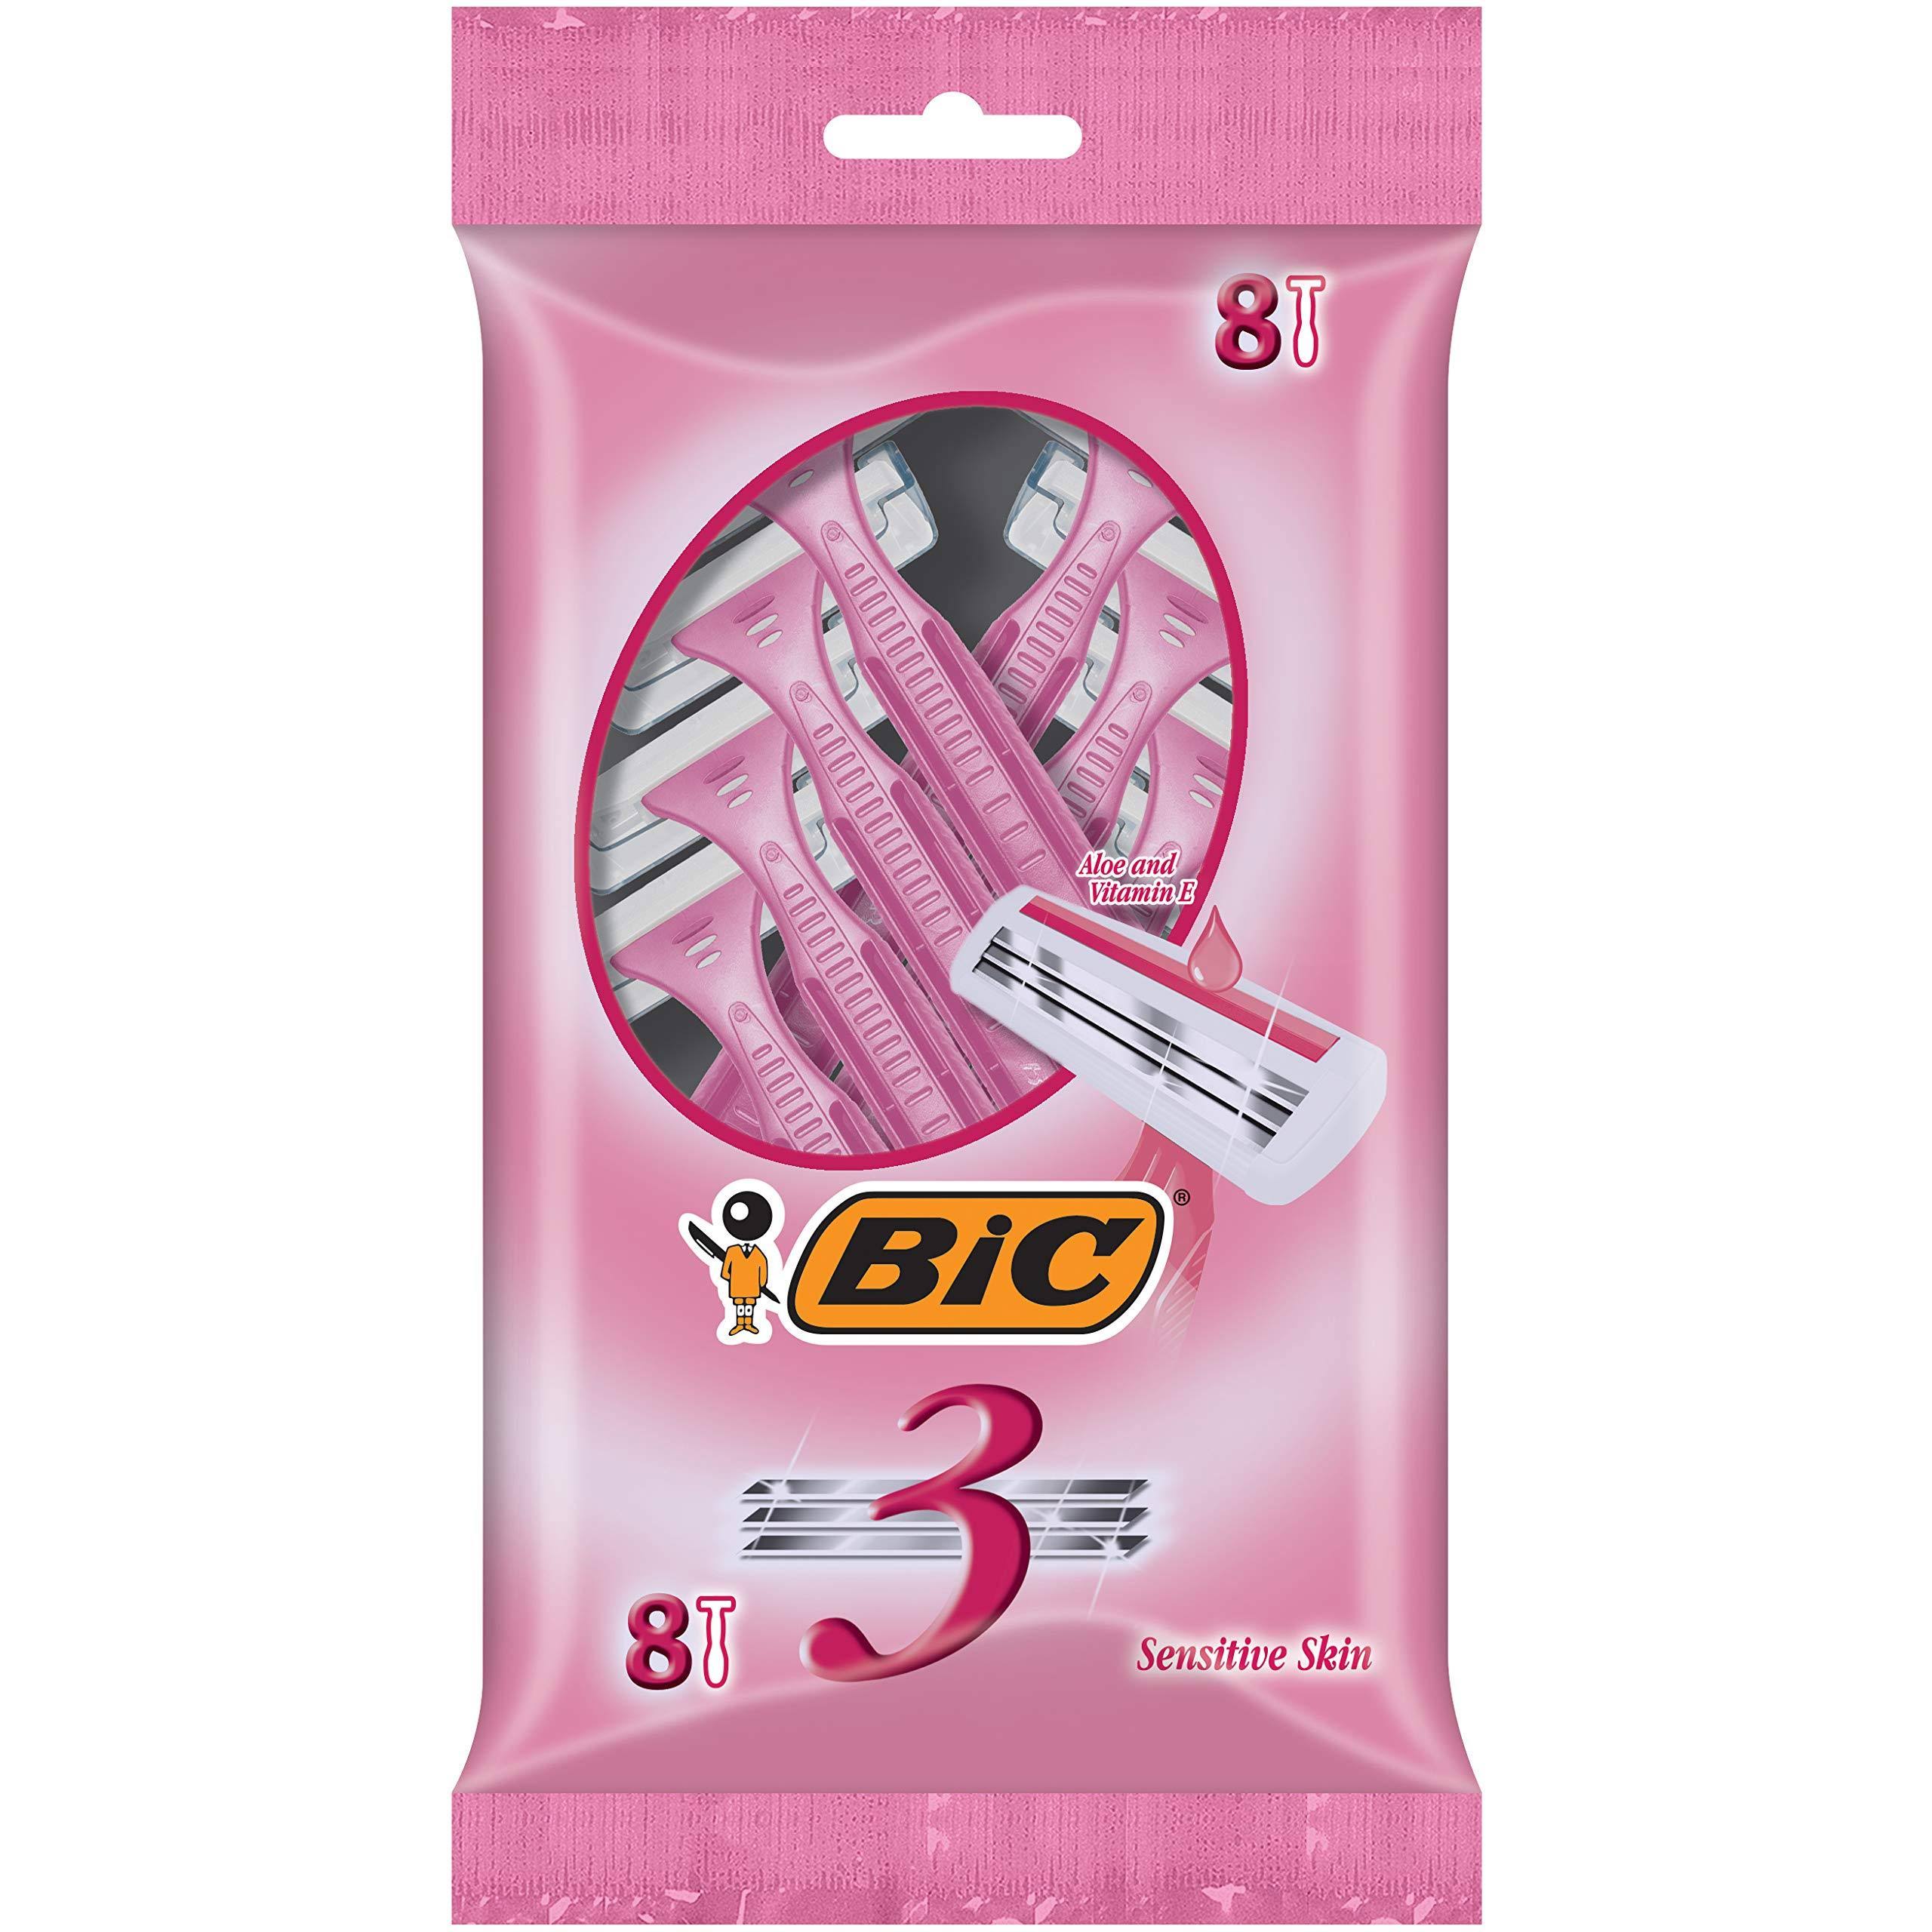 Bic Twin Select Silky Touch Razors - 10ct